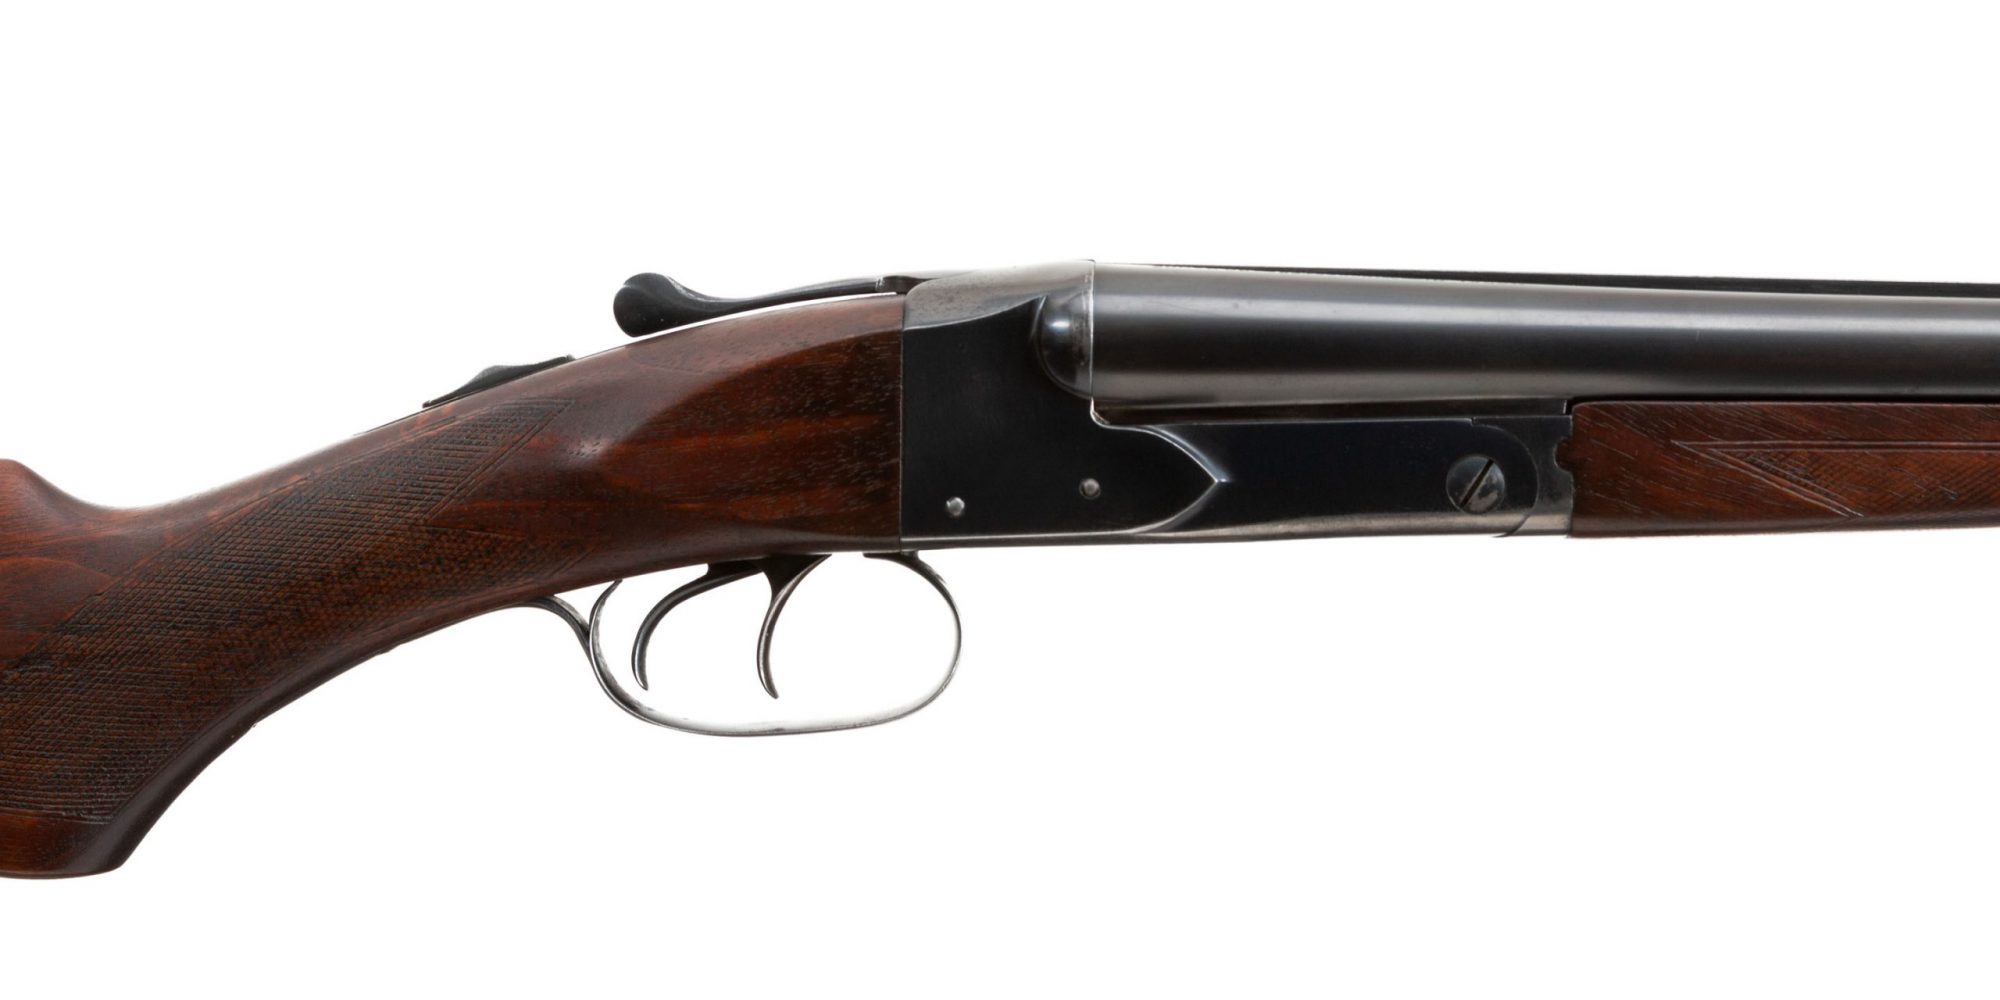 Photo of a pre-owned Winchester Model 21 20 gauge side by side shotgun, for sale as-is by Turnbull Restoration of Bloomfield, NY